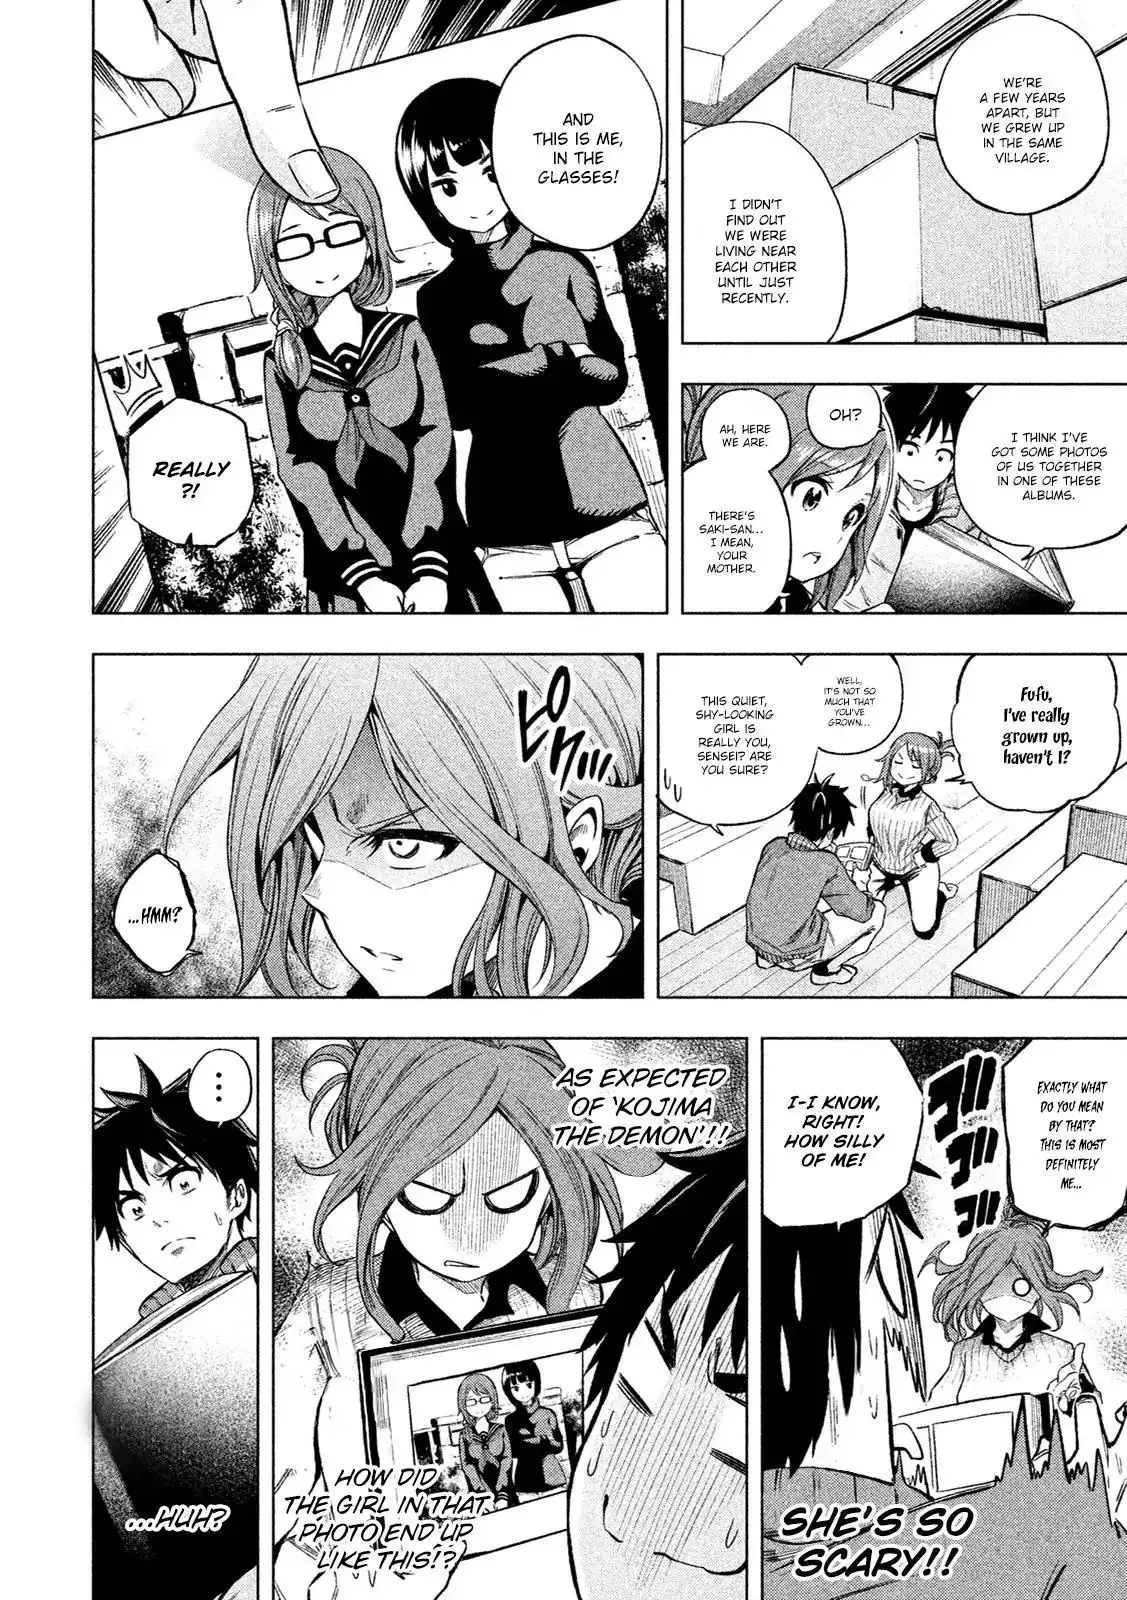 Why are you here Sensei!? - 7 page 4